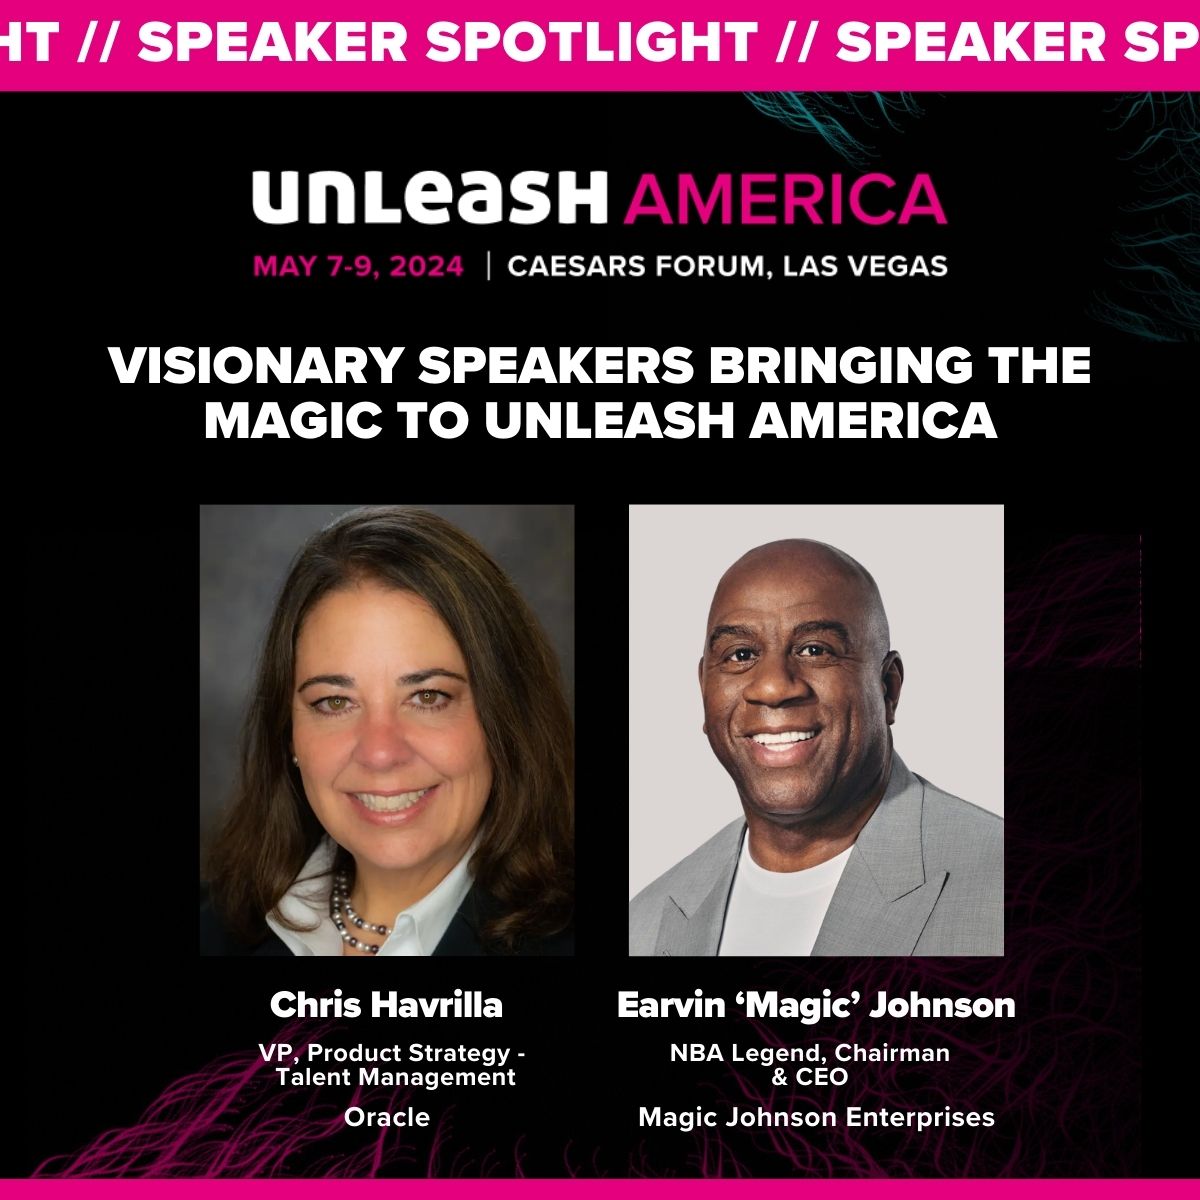 NBA Legend and entrepreneur Earvin ‘Magic’ Johnson, @MagicJohnson Enterprises, and thought leader Chris Havrilla, @Oracle, are two of the forward-thinking pioneers shaping the new world of work joining us at #UNLEASHAMERICA. Get your ticket here: bit.ly/3x87sCo